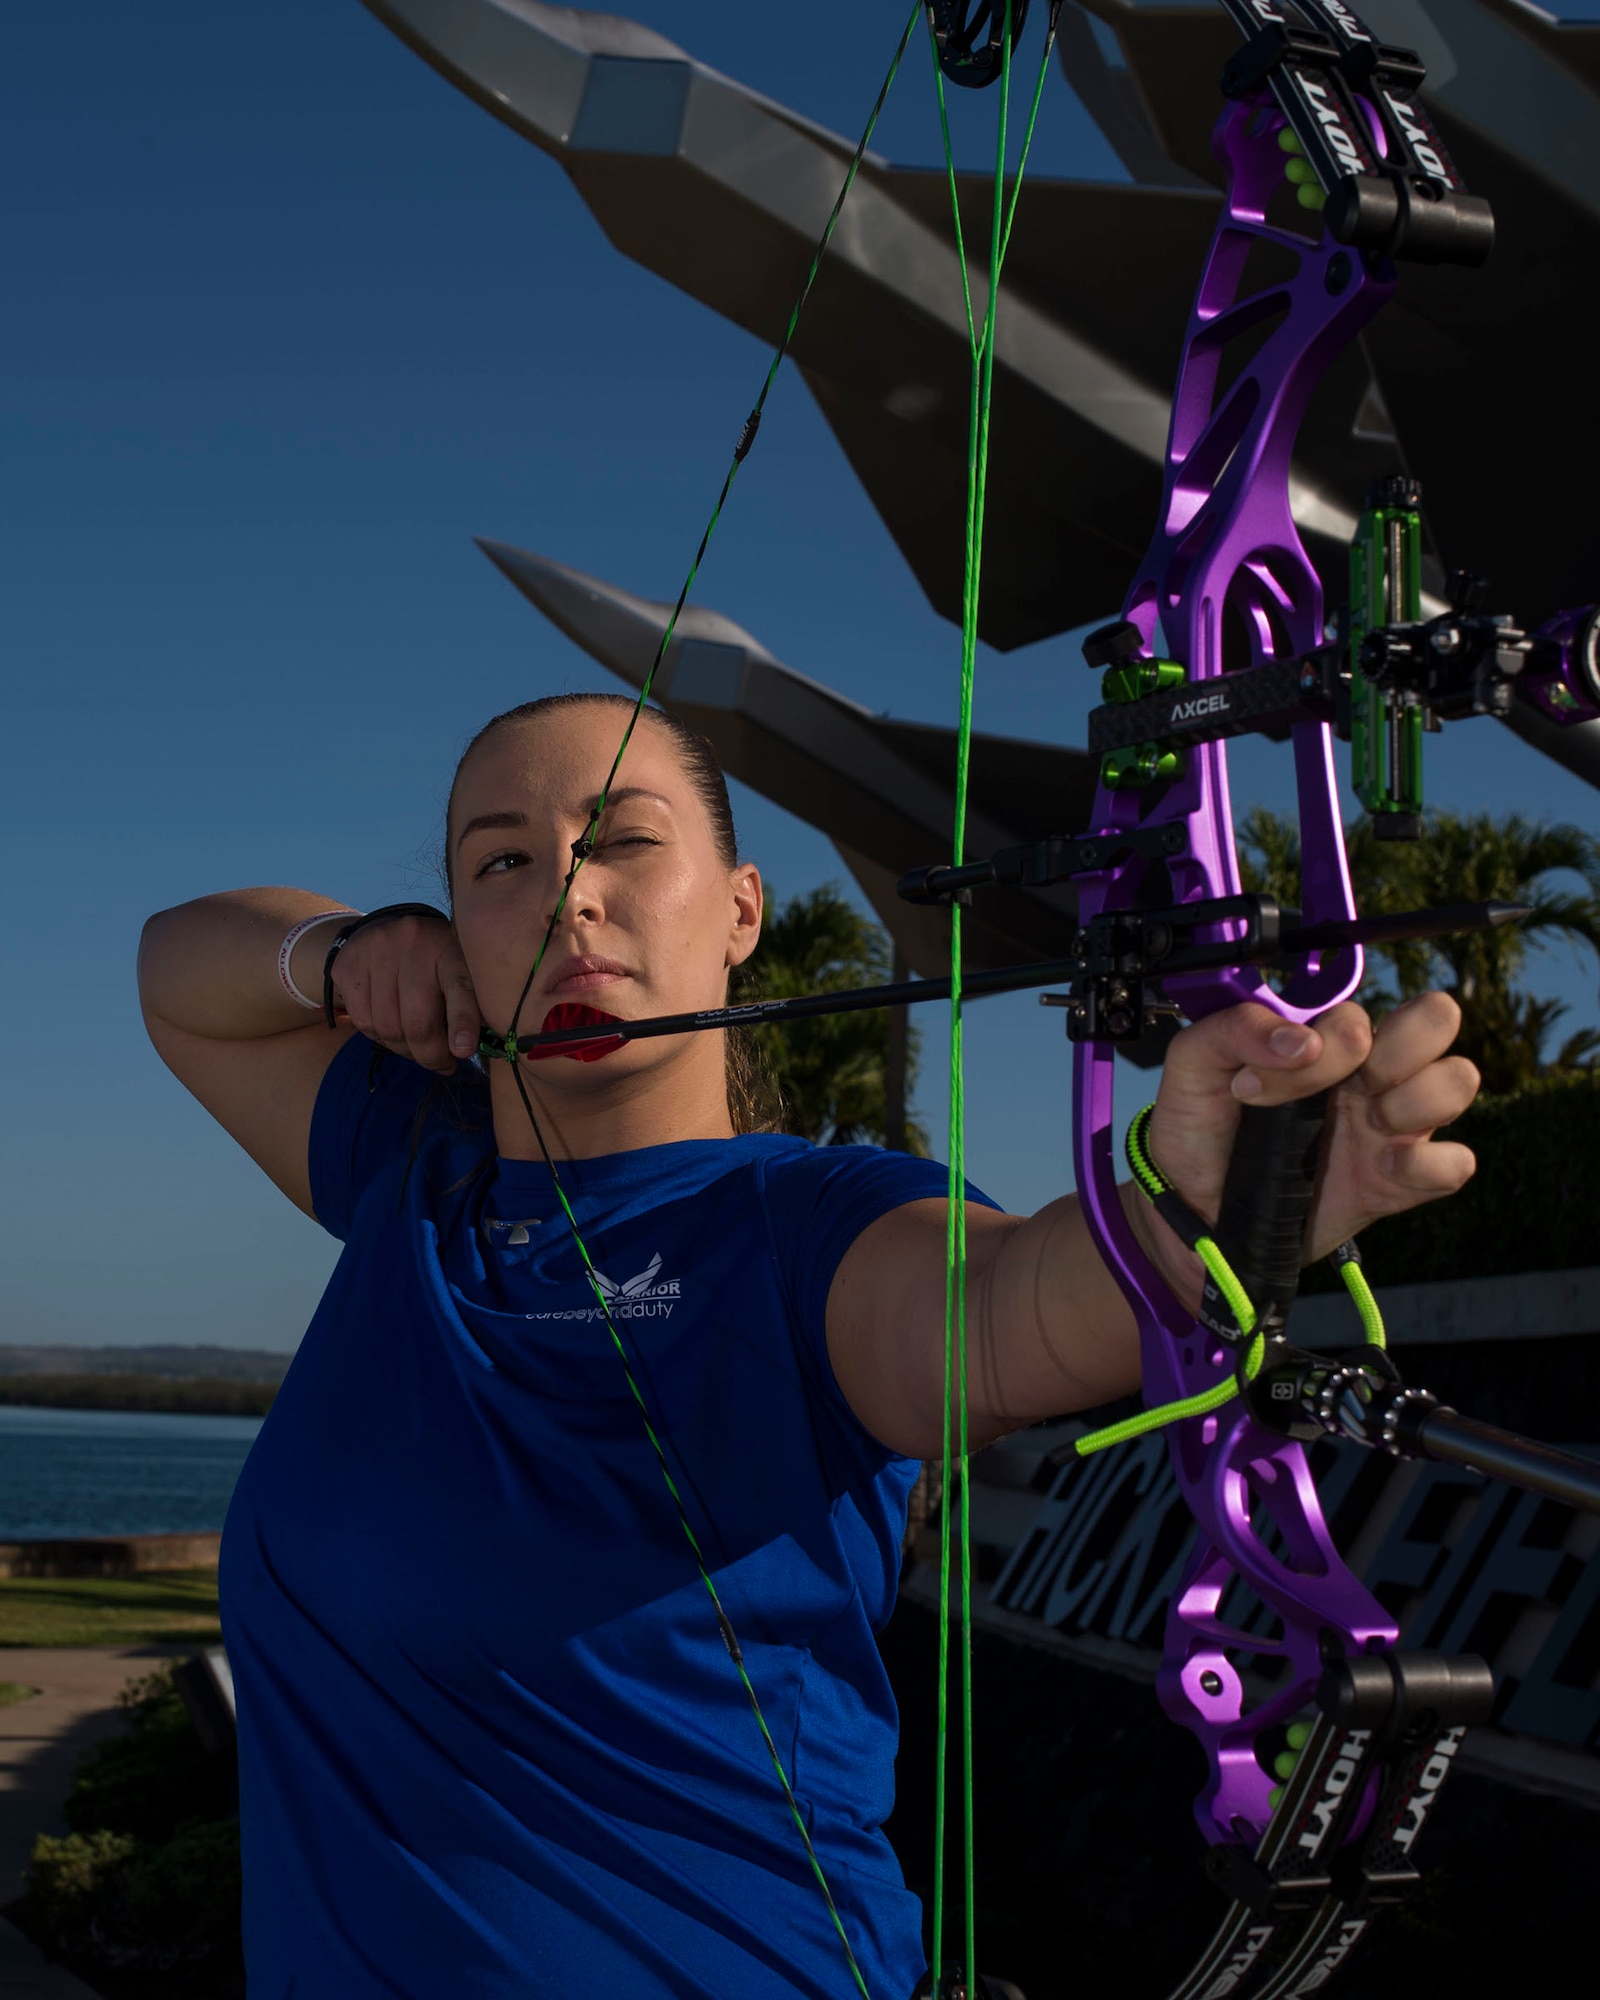 Senior Airman Faith Donato, 647th Security Forces Squadron, poses with her bow and arrow. Donato will serve as an alternate at the 2019 Wounded Warrior Games held this summer in Tampa, Florida. (U.S. Air Force photo by Tech. Sgt. Heather Redman)